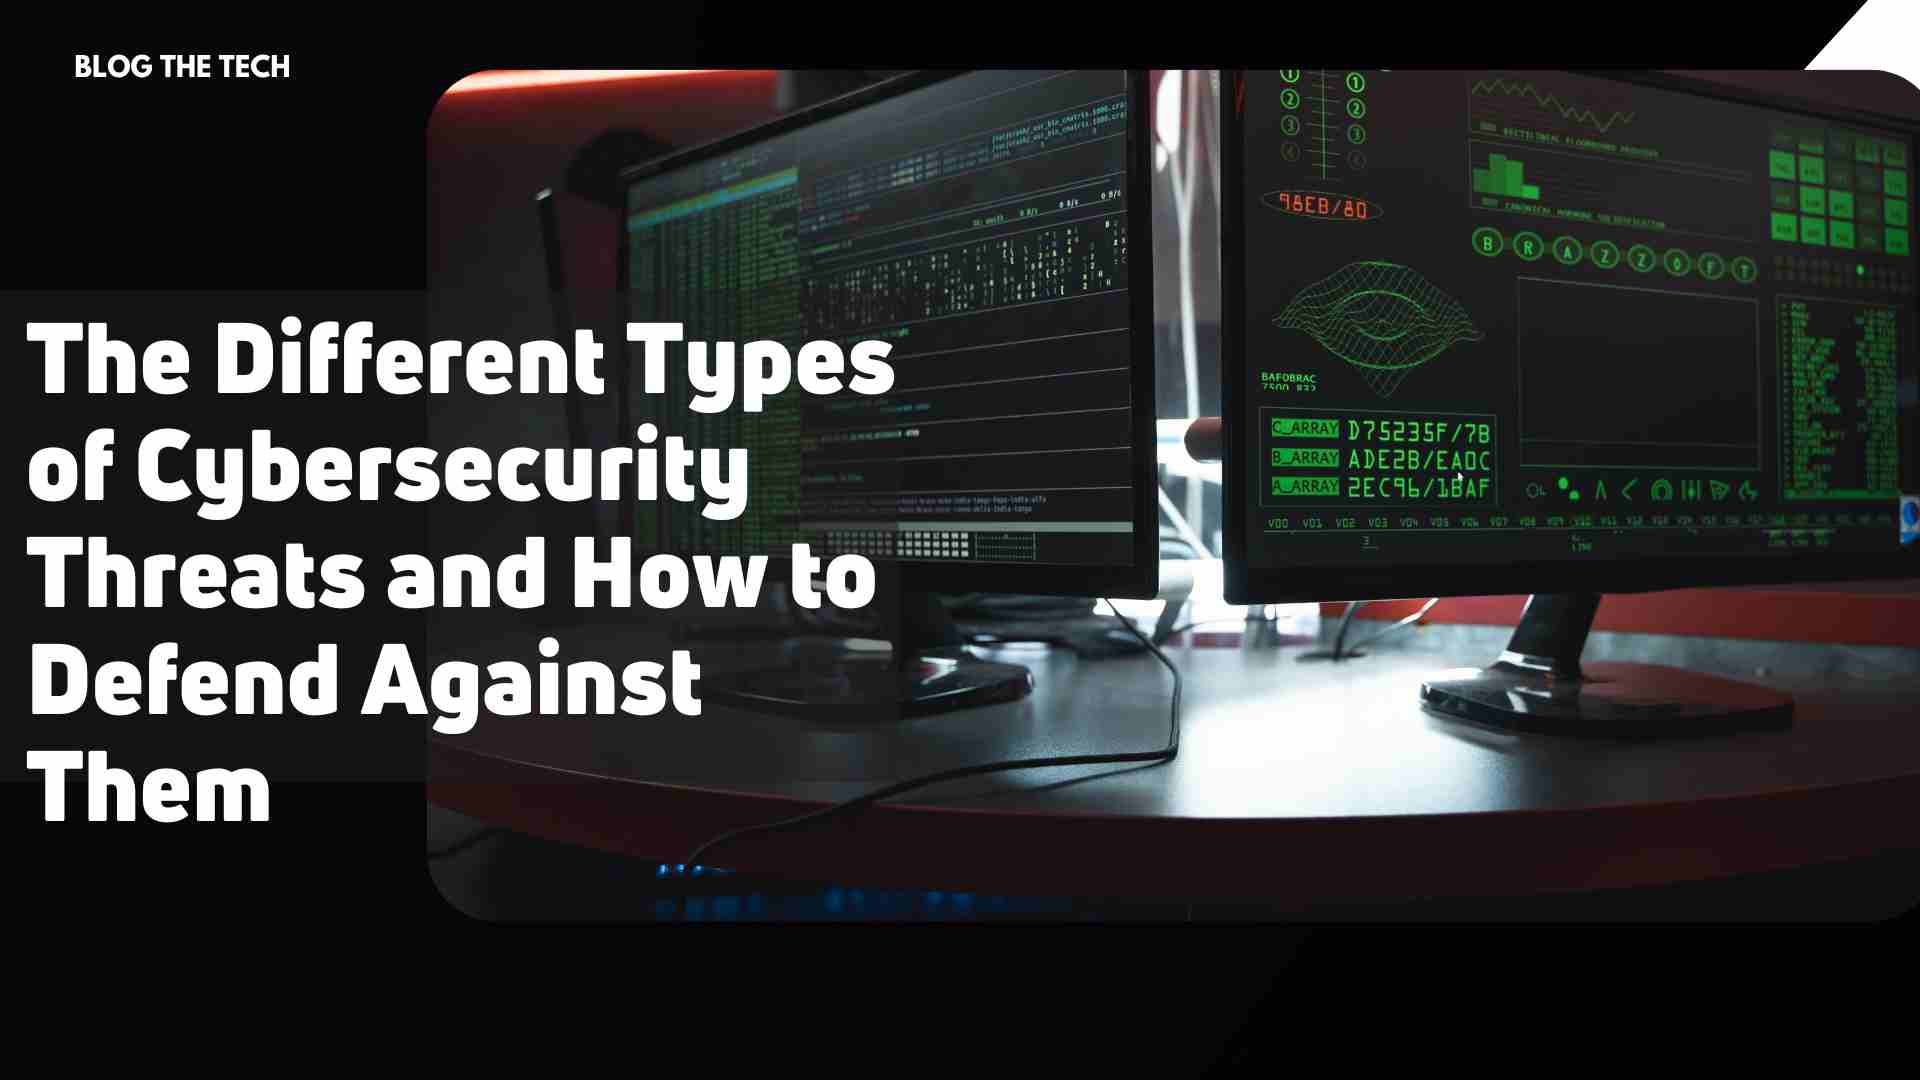 The Different Types of Cybersecurity Threats and How to Defend Against Them